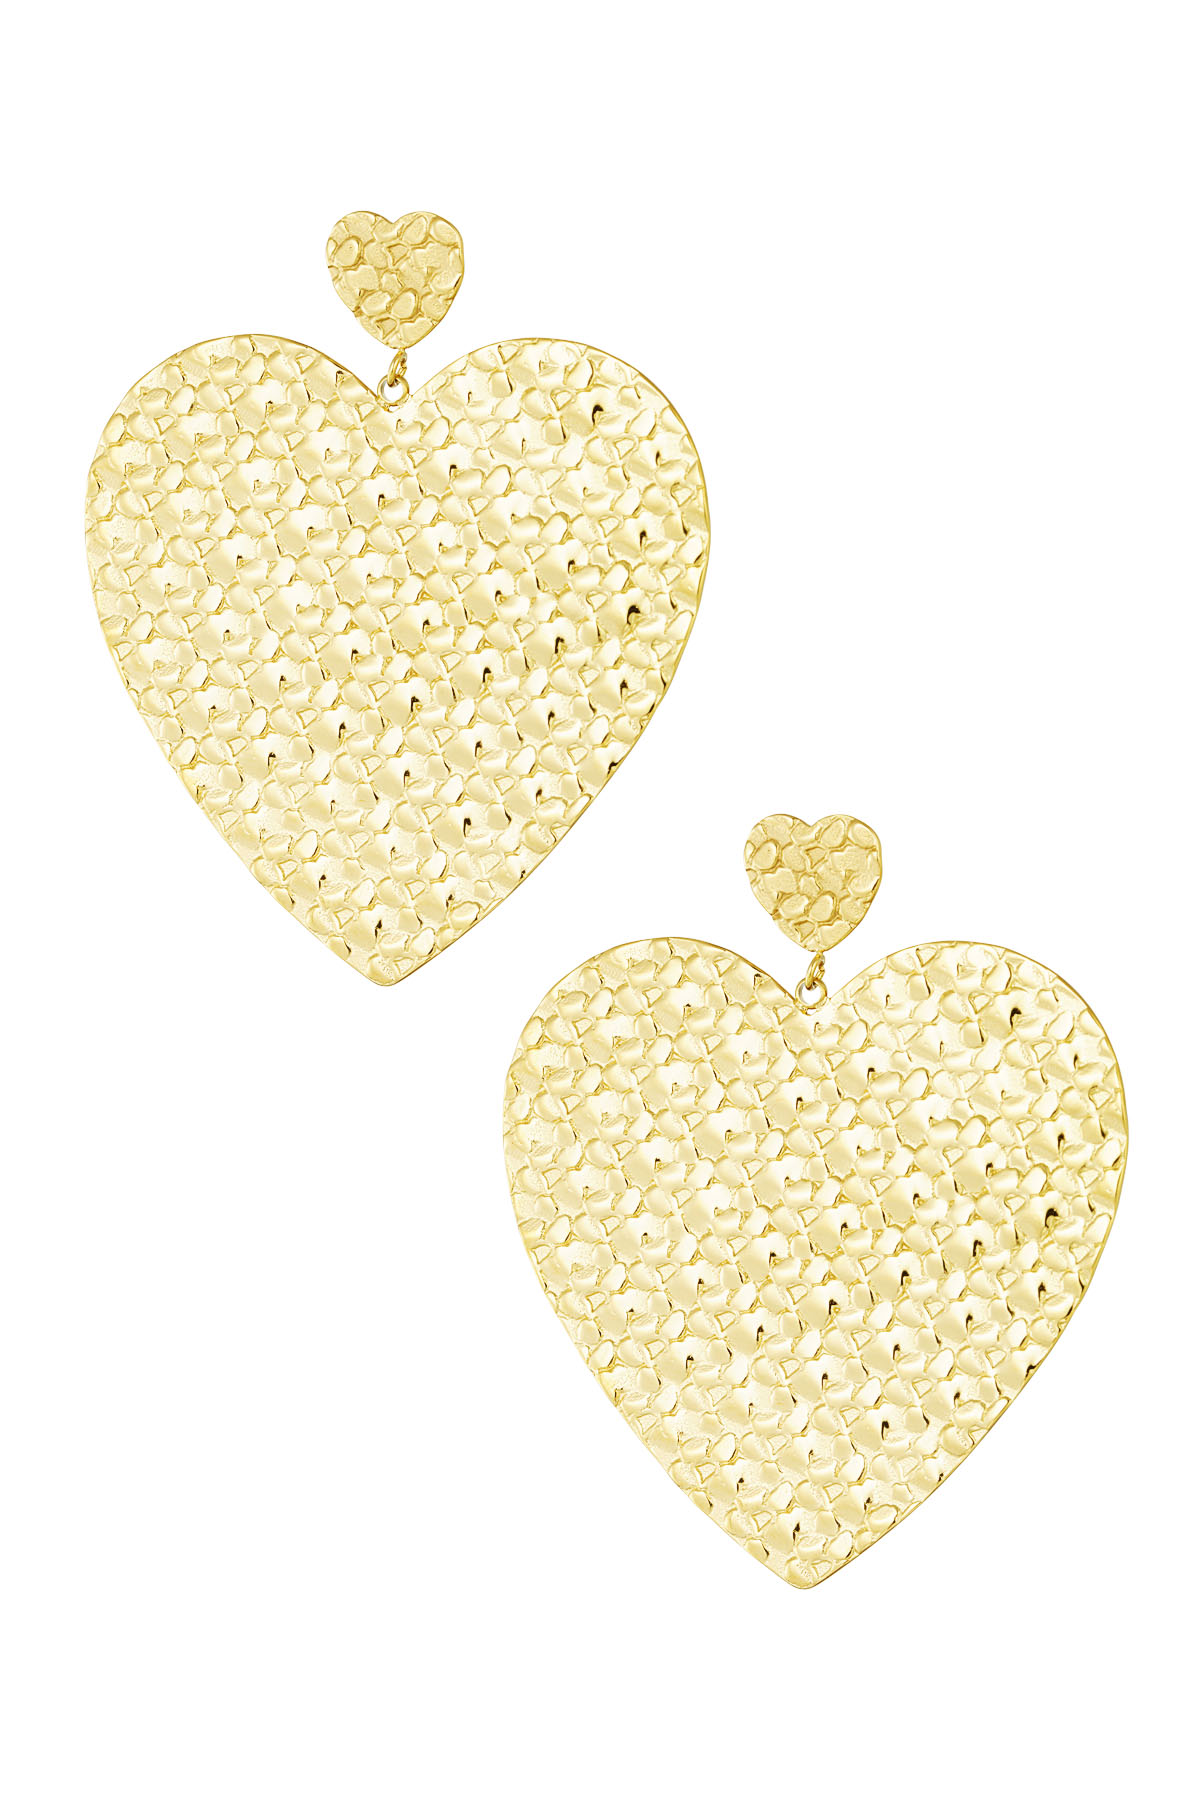 Small heart earring with large heart pendant - gold h5 